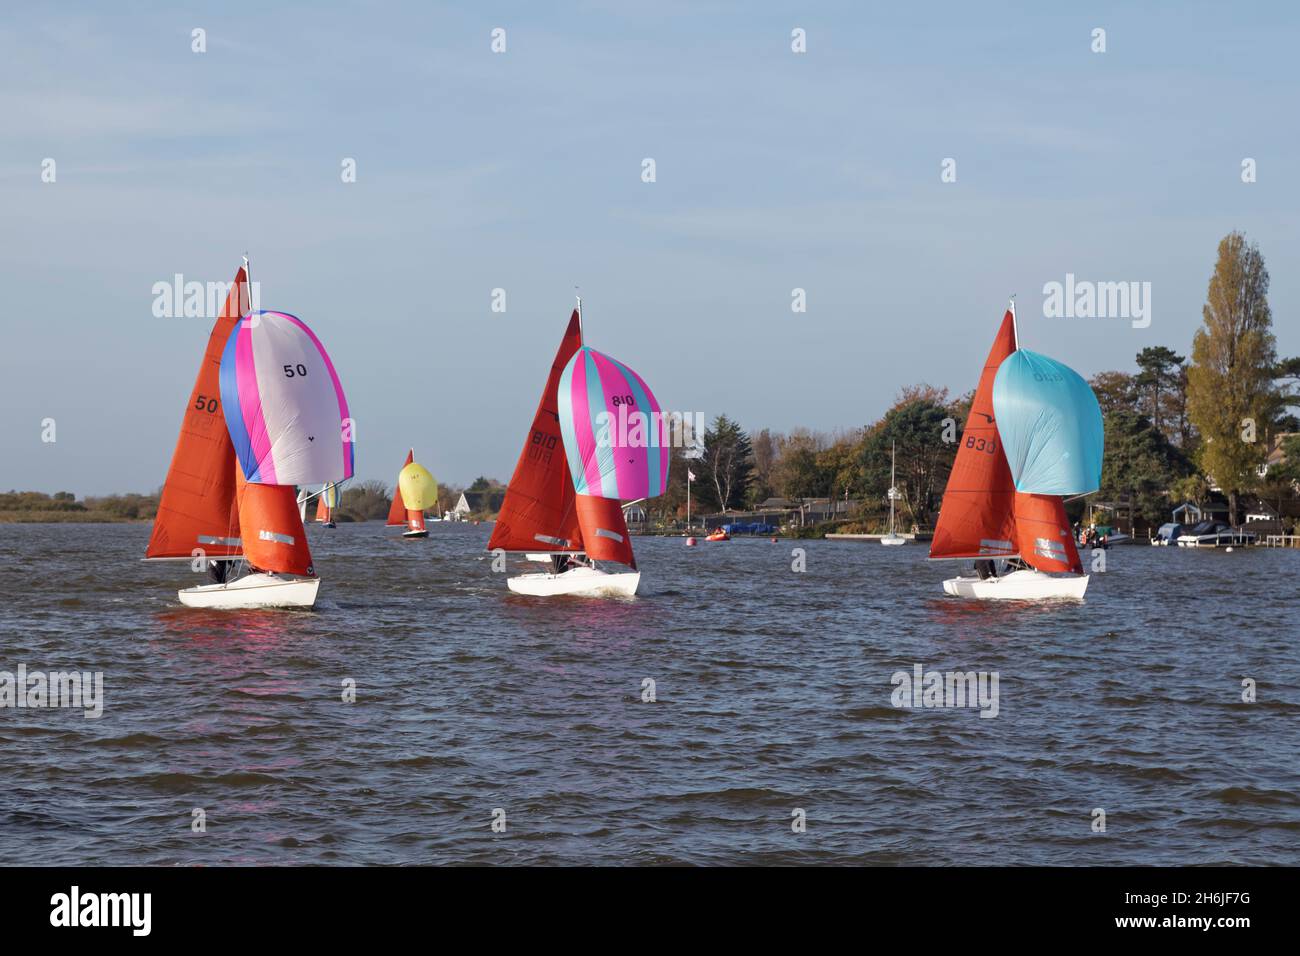 Sailing dinghy,s racing on Oulton broad with spinnaker sails out. Stock Photo